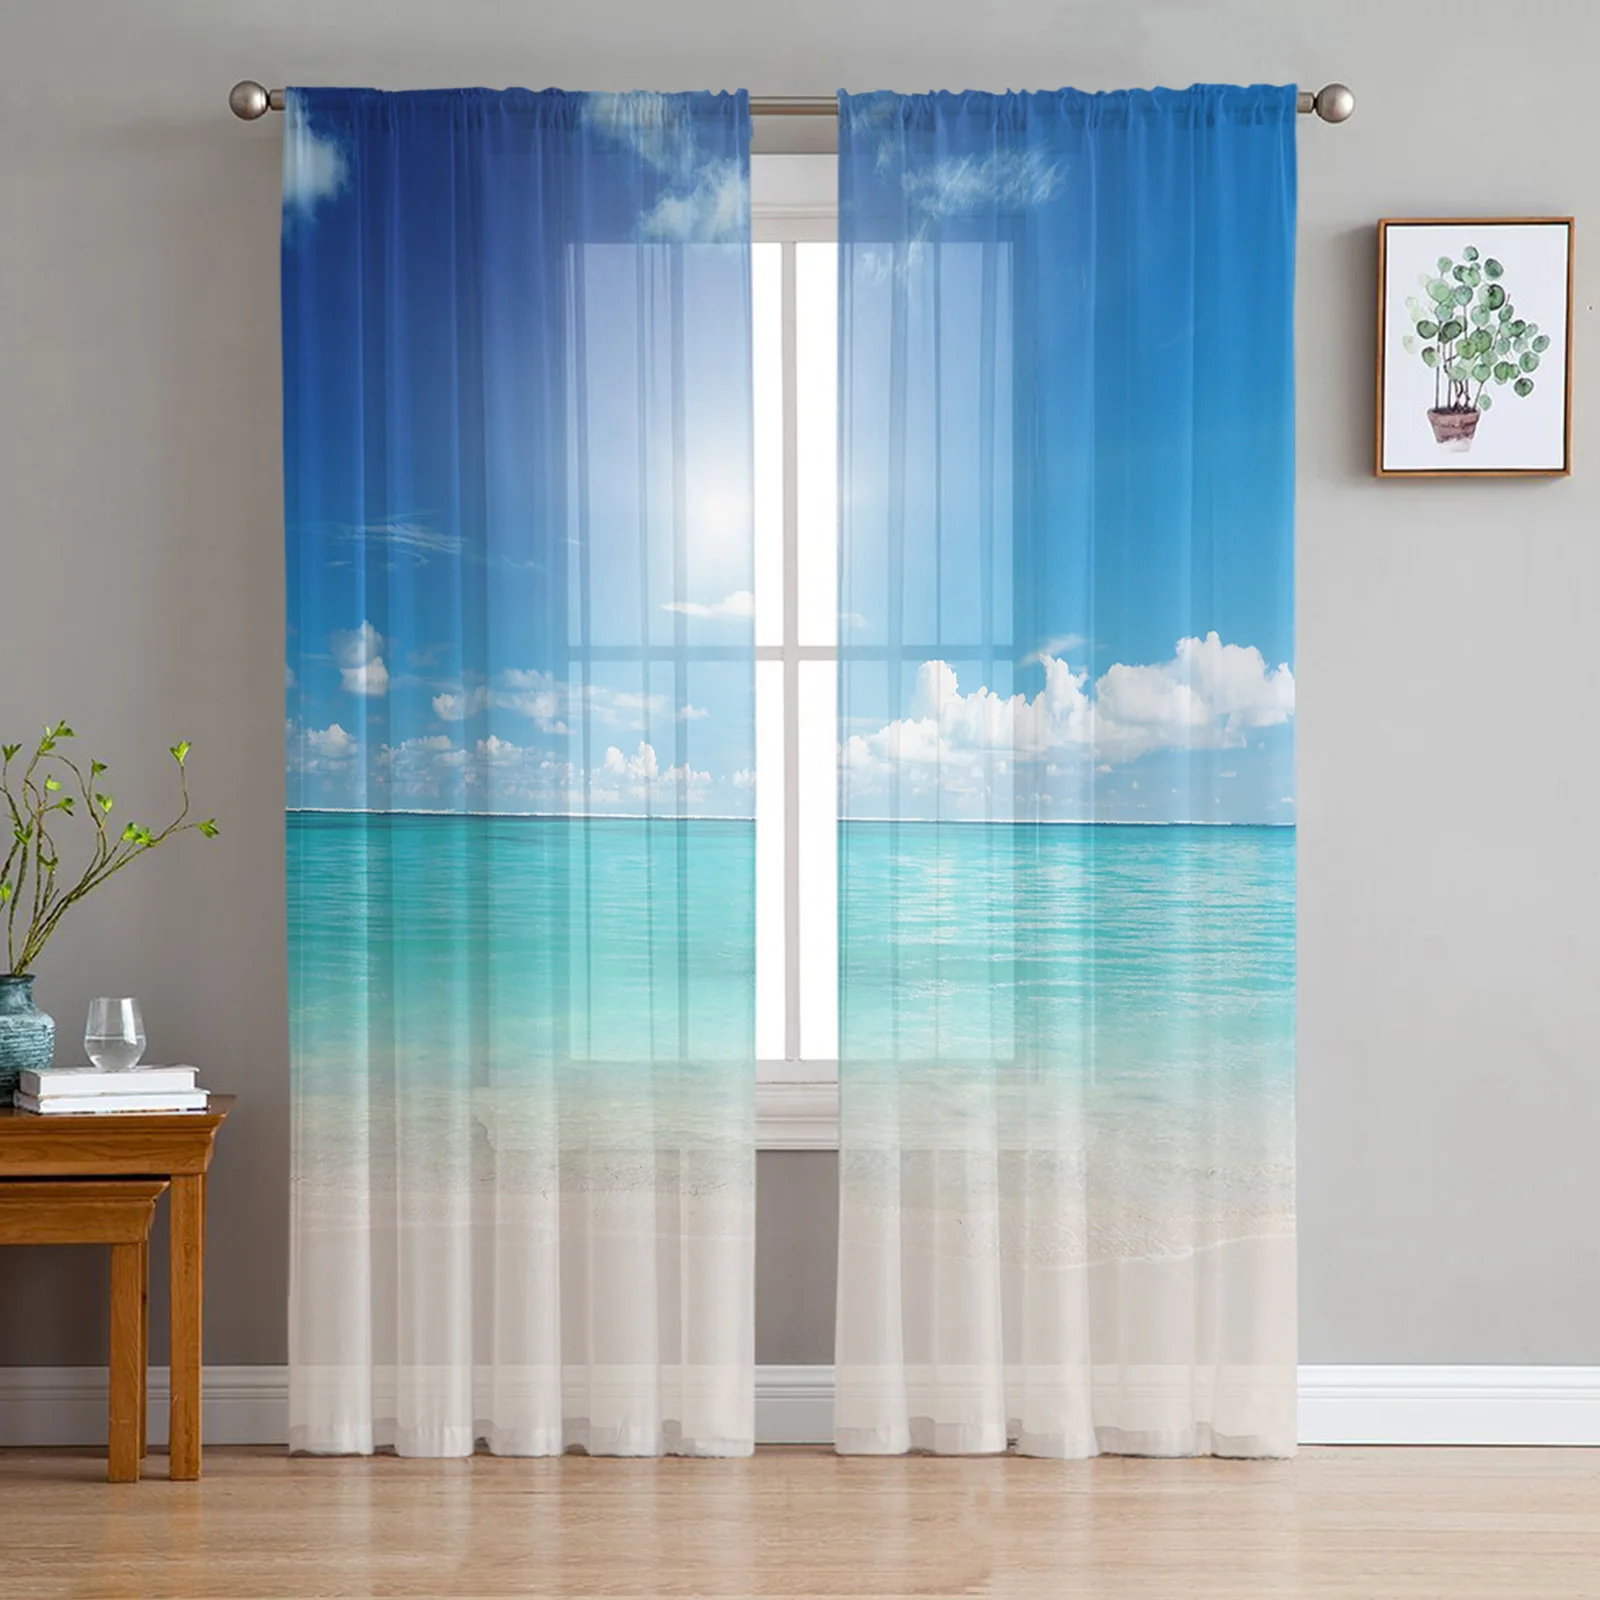 Blue Seaside Beach Clouds Chiffon Sheer Curtains for Living Room Home Decoration Window Voile Tulle Curtain Drapes